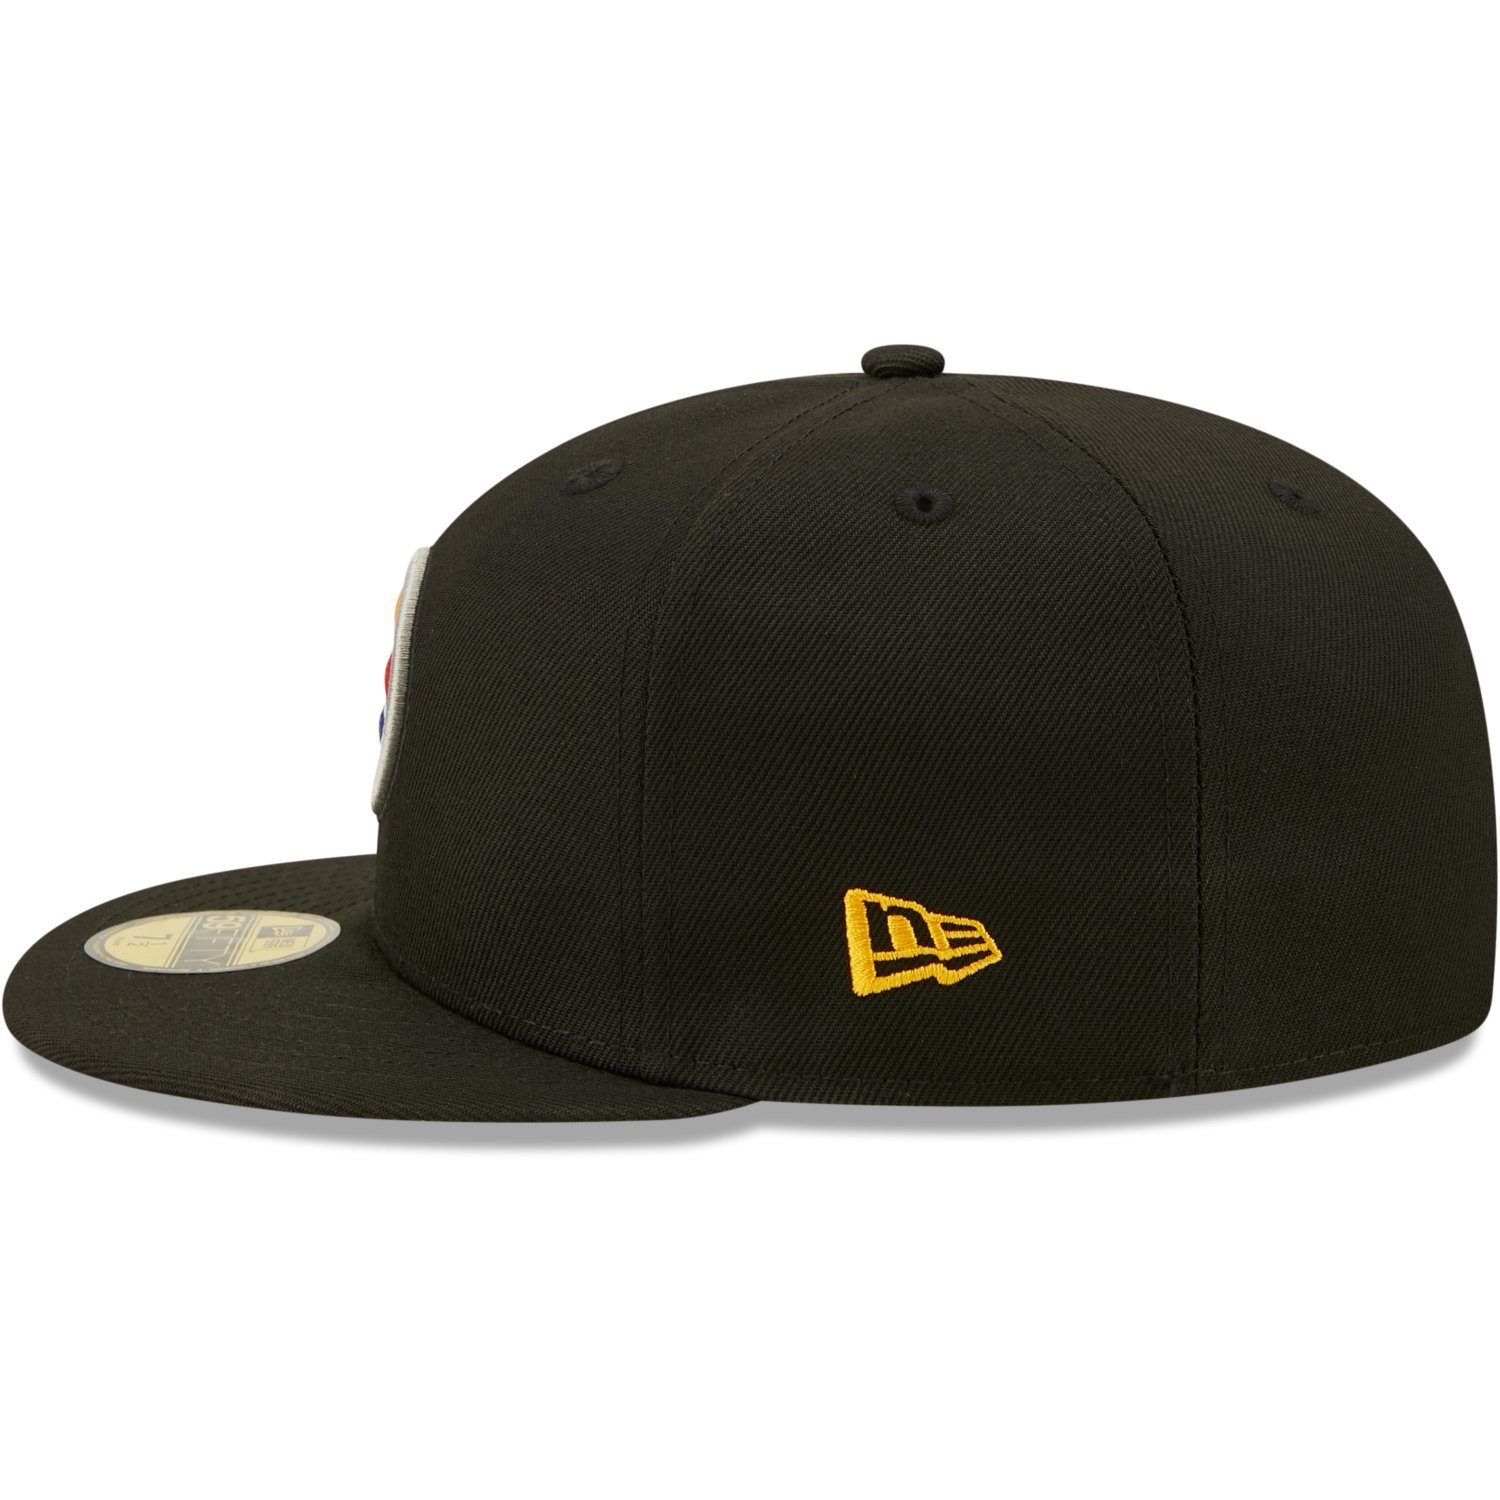 New Era Fitted Cap 59Fifty Seasons Pittsburgh 80 Steelers